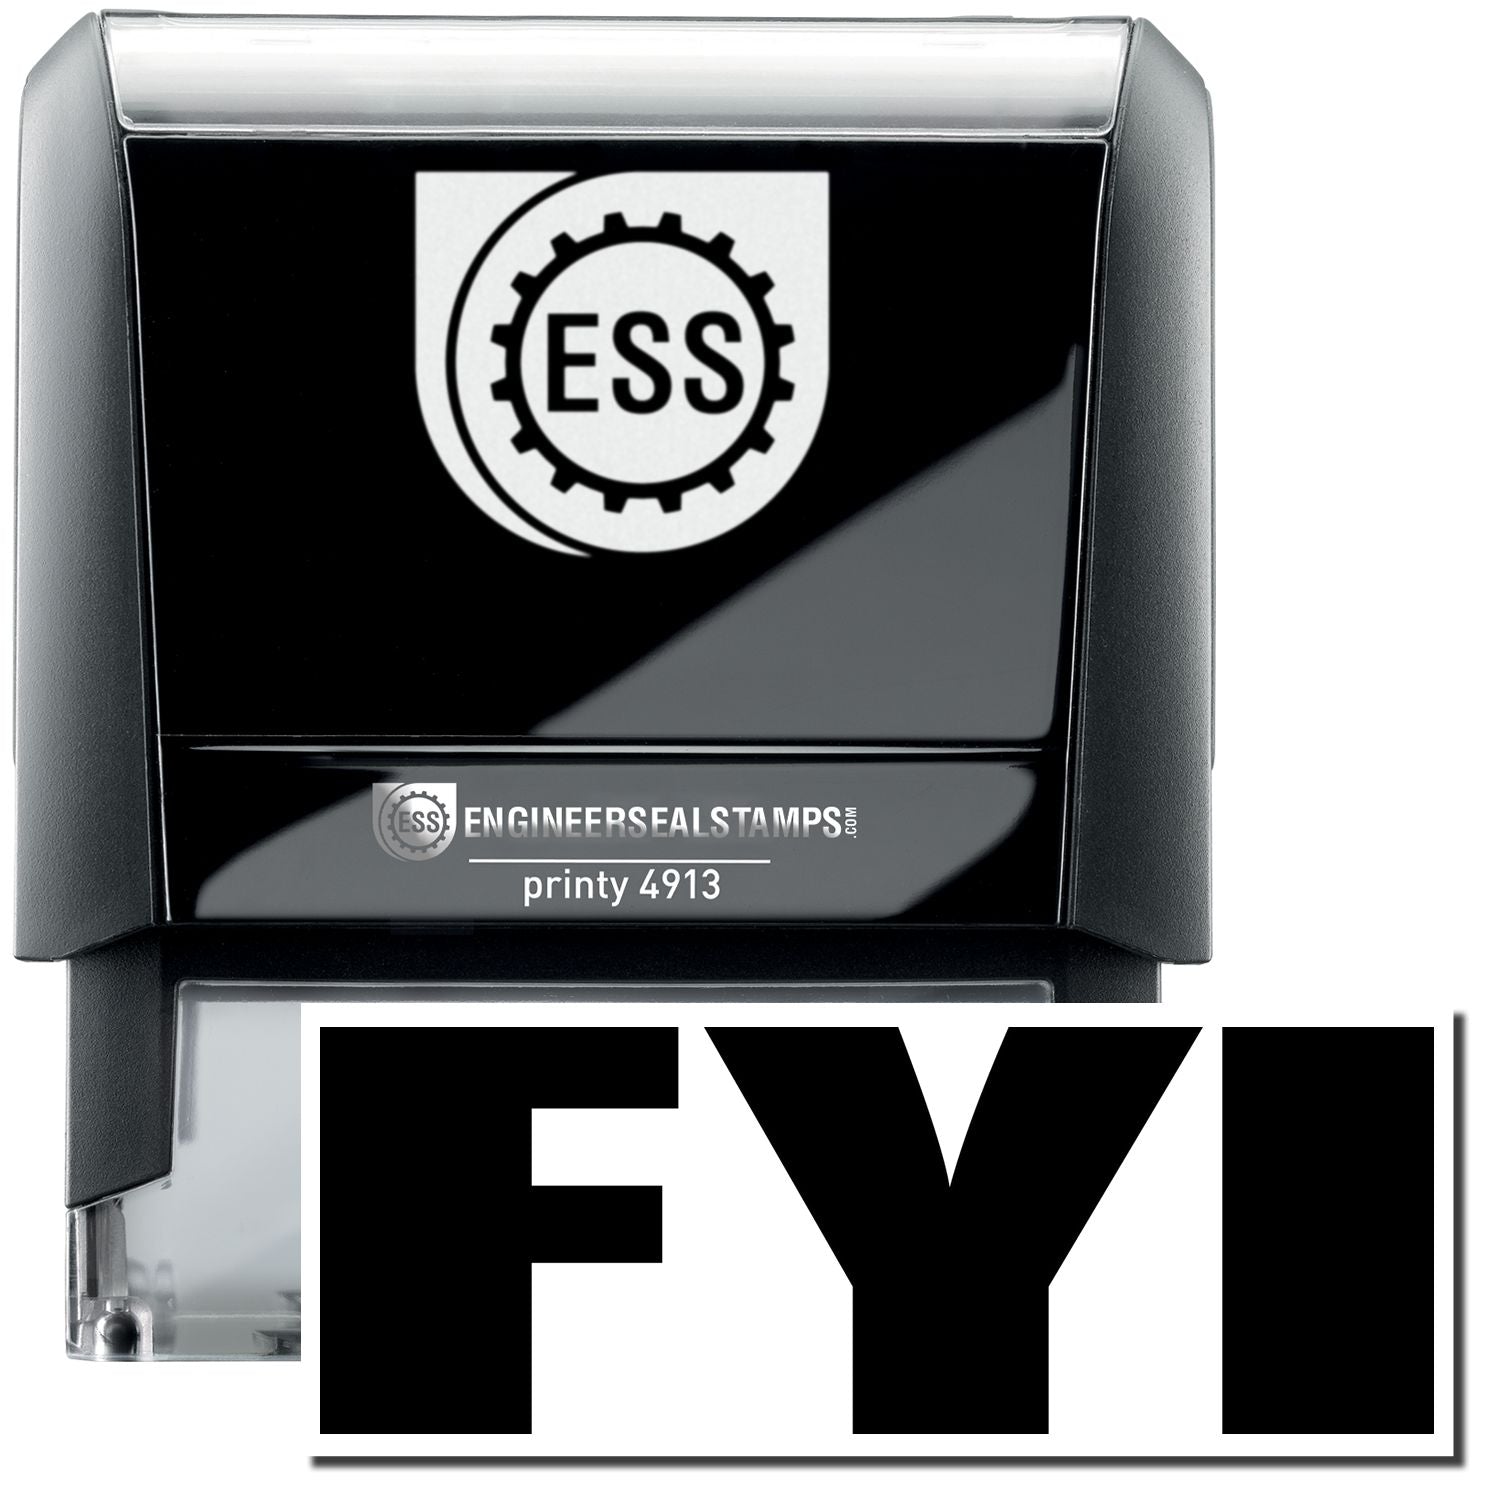 A self-inking stamp with a stamped image showing how the text "FYI" in a large bold font is displayed by it after stamping.